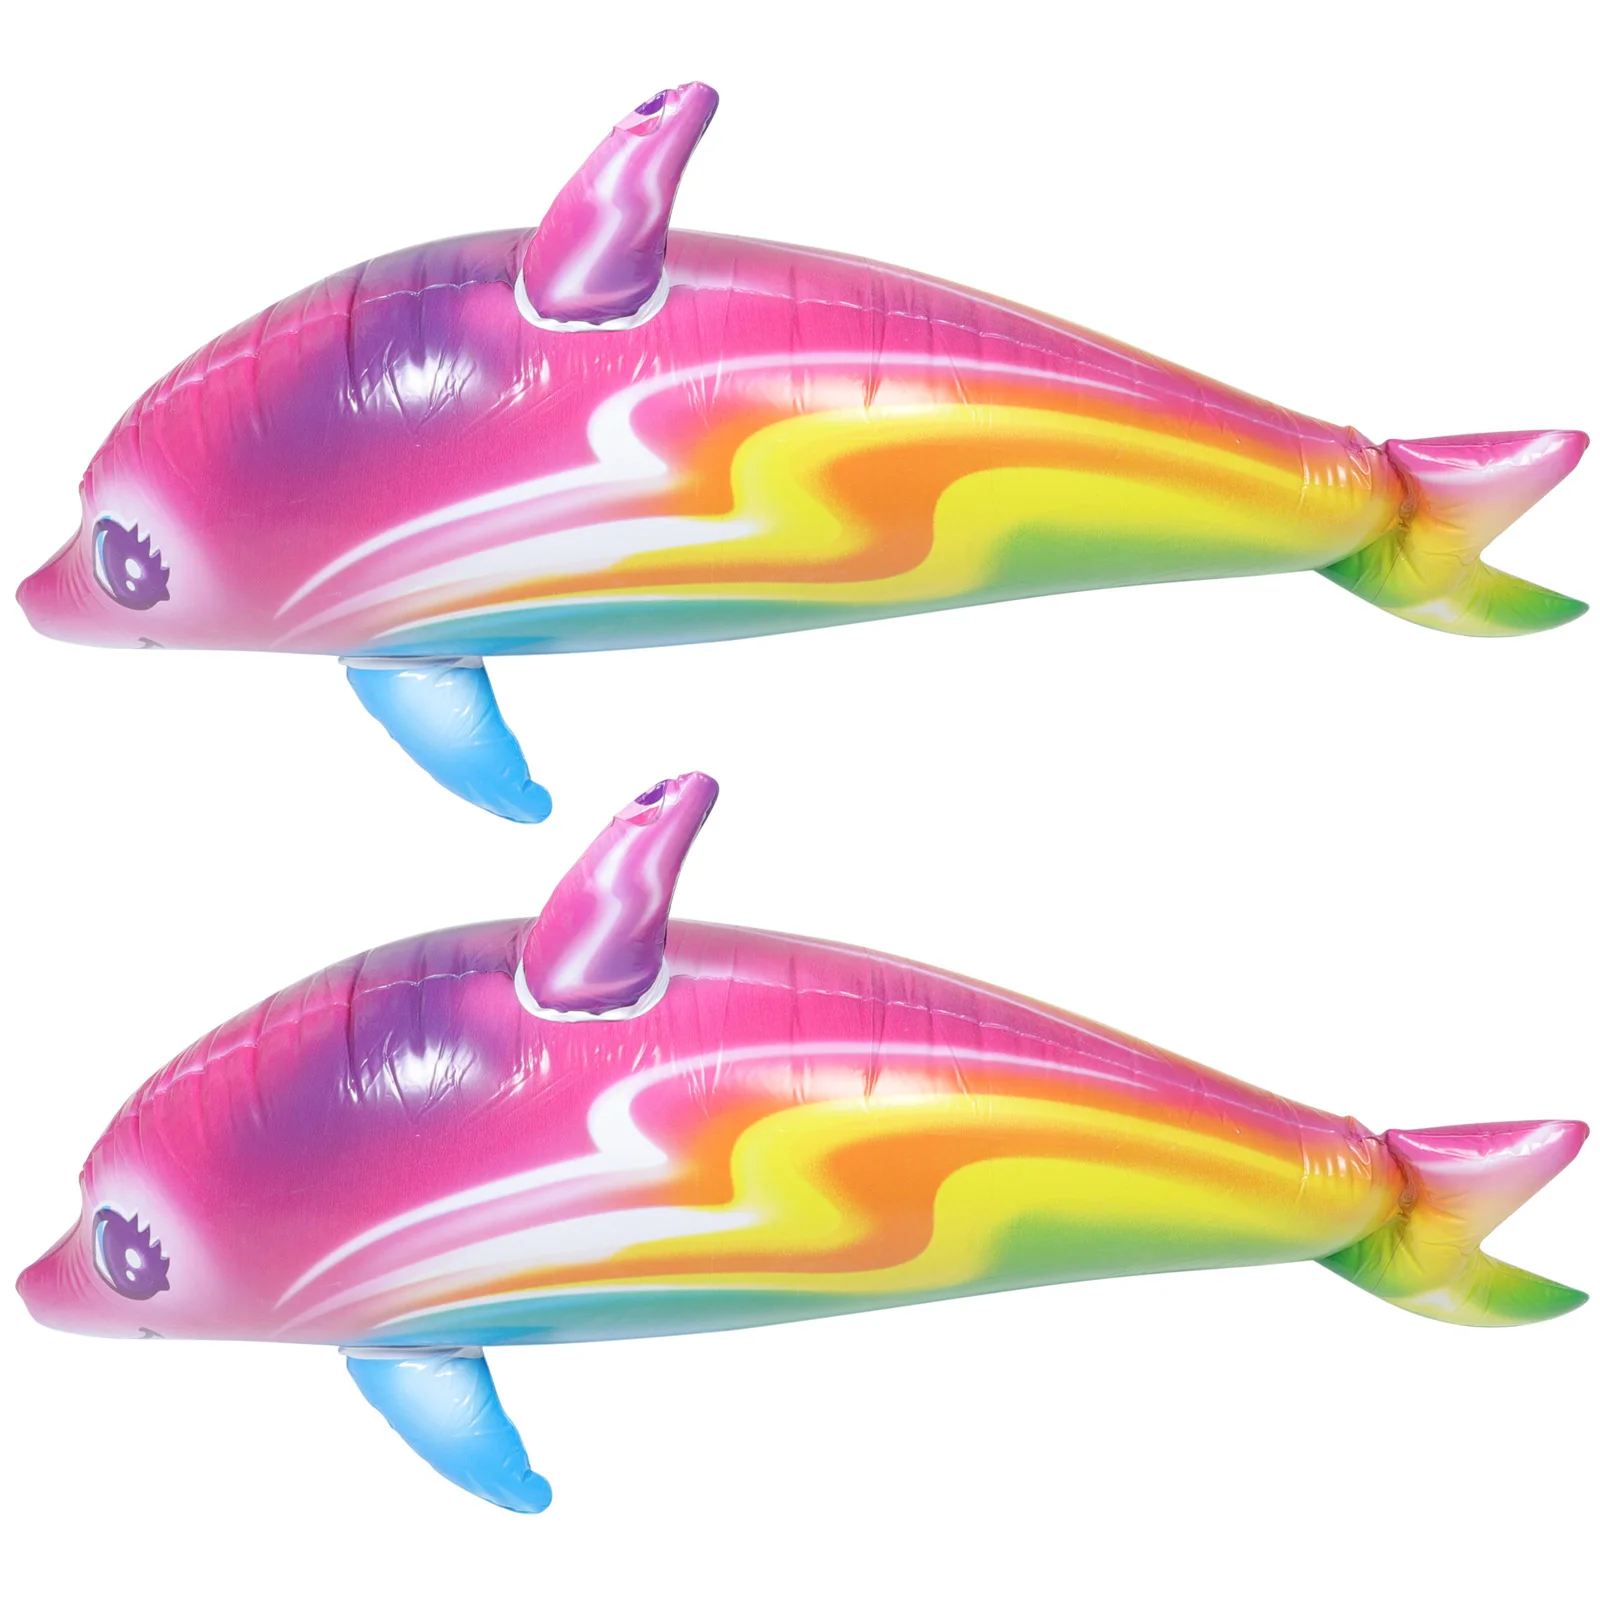 2 Pcs Inflatable Dolphin Toy Big Kids Educational Ballons Multicolor Giant for - £10.44 GBP